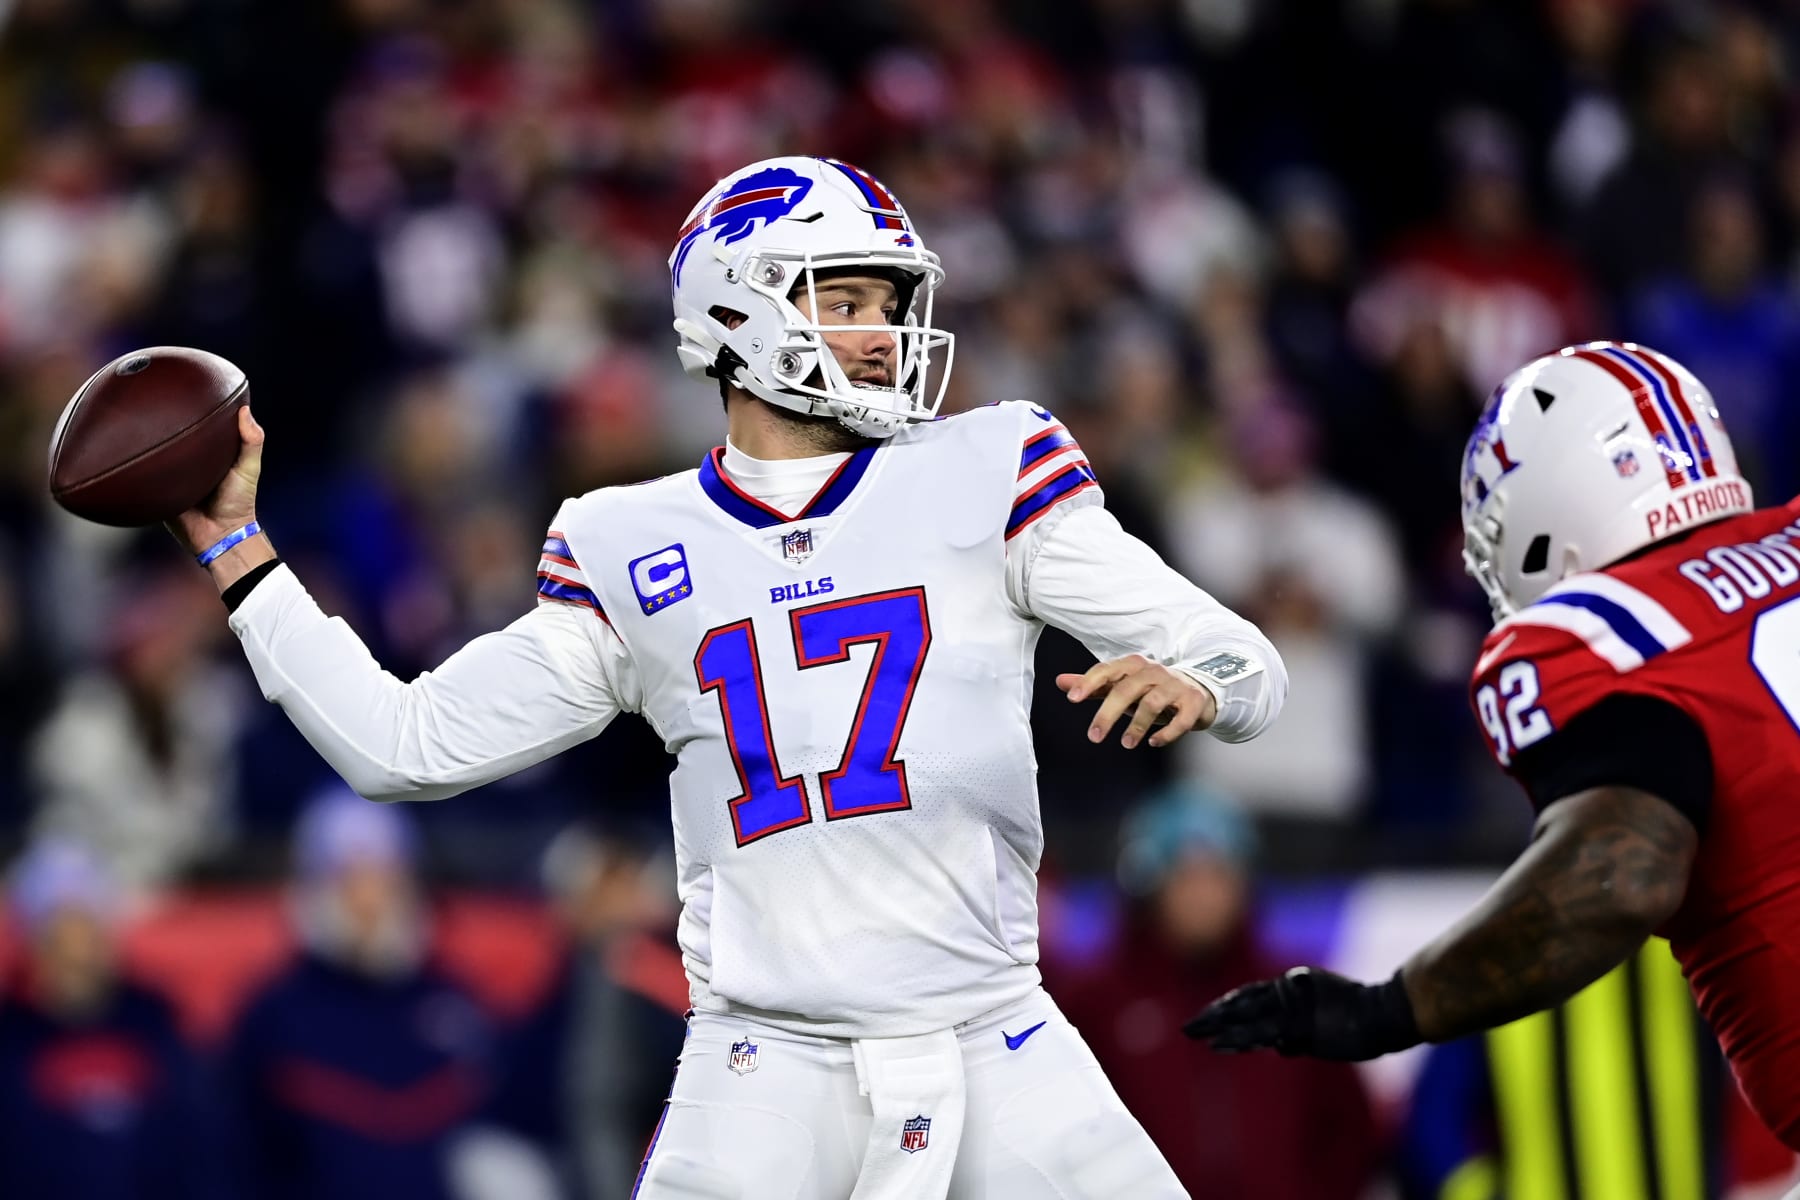 NFL Playoff Picture 2022-23 Week 13: Standings, Scenarios After